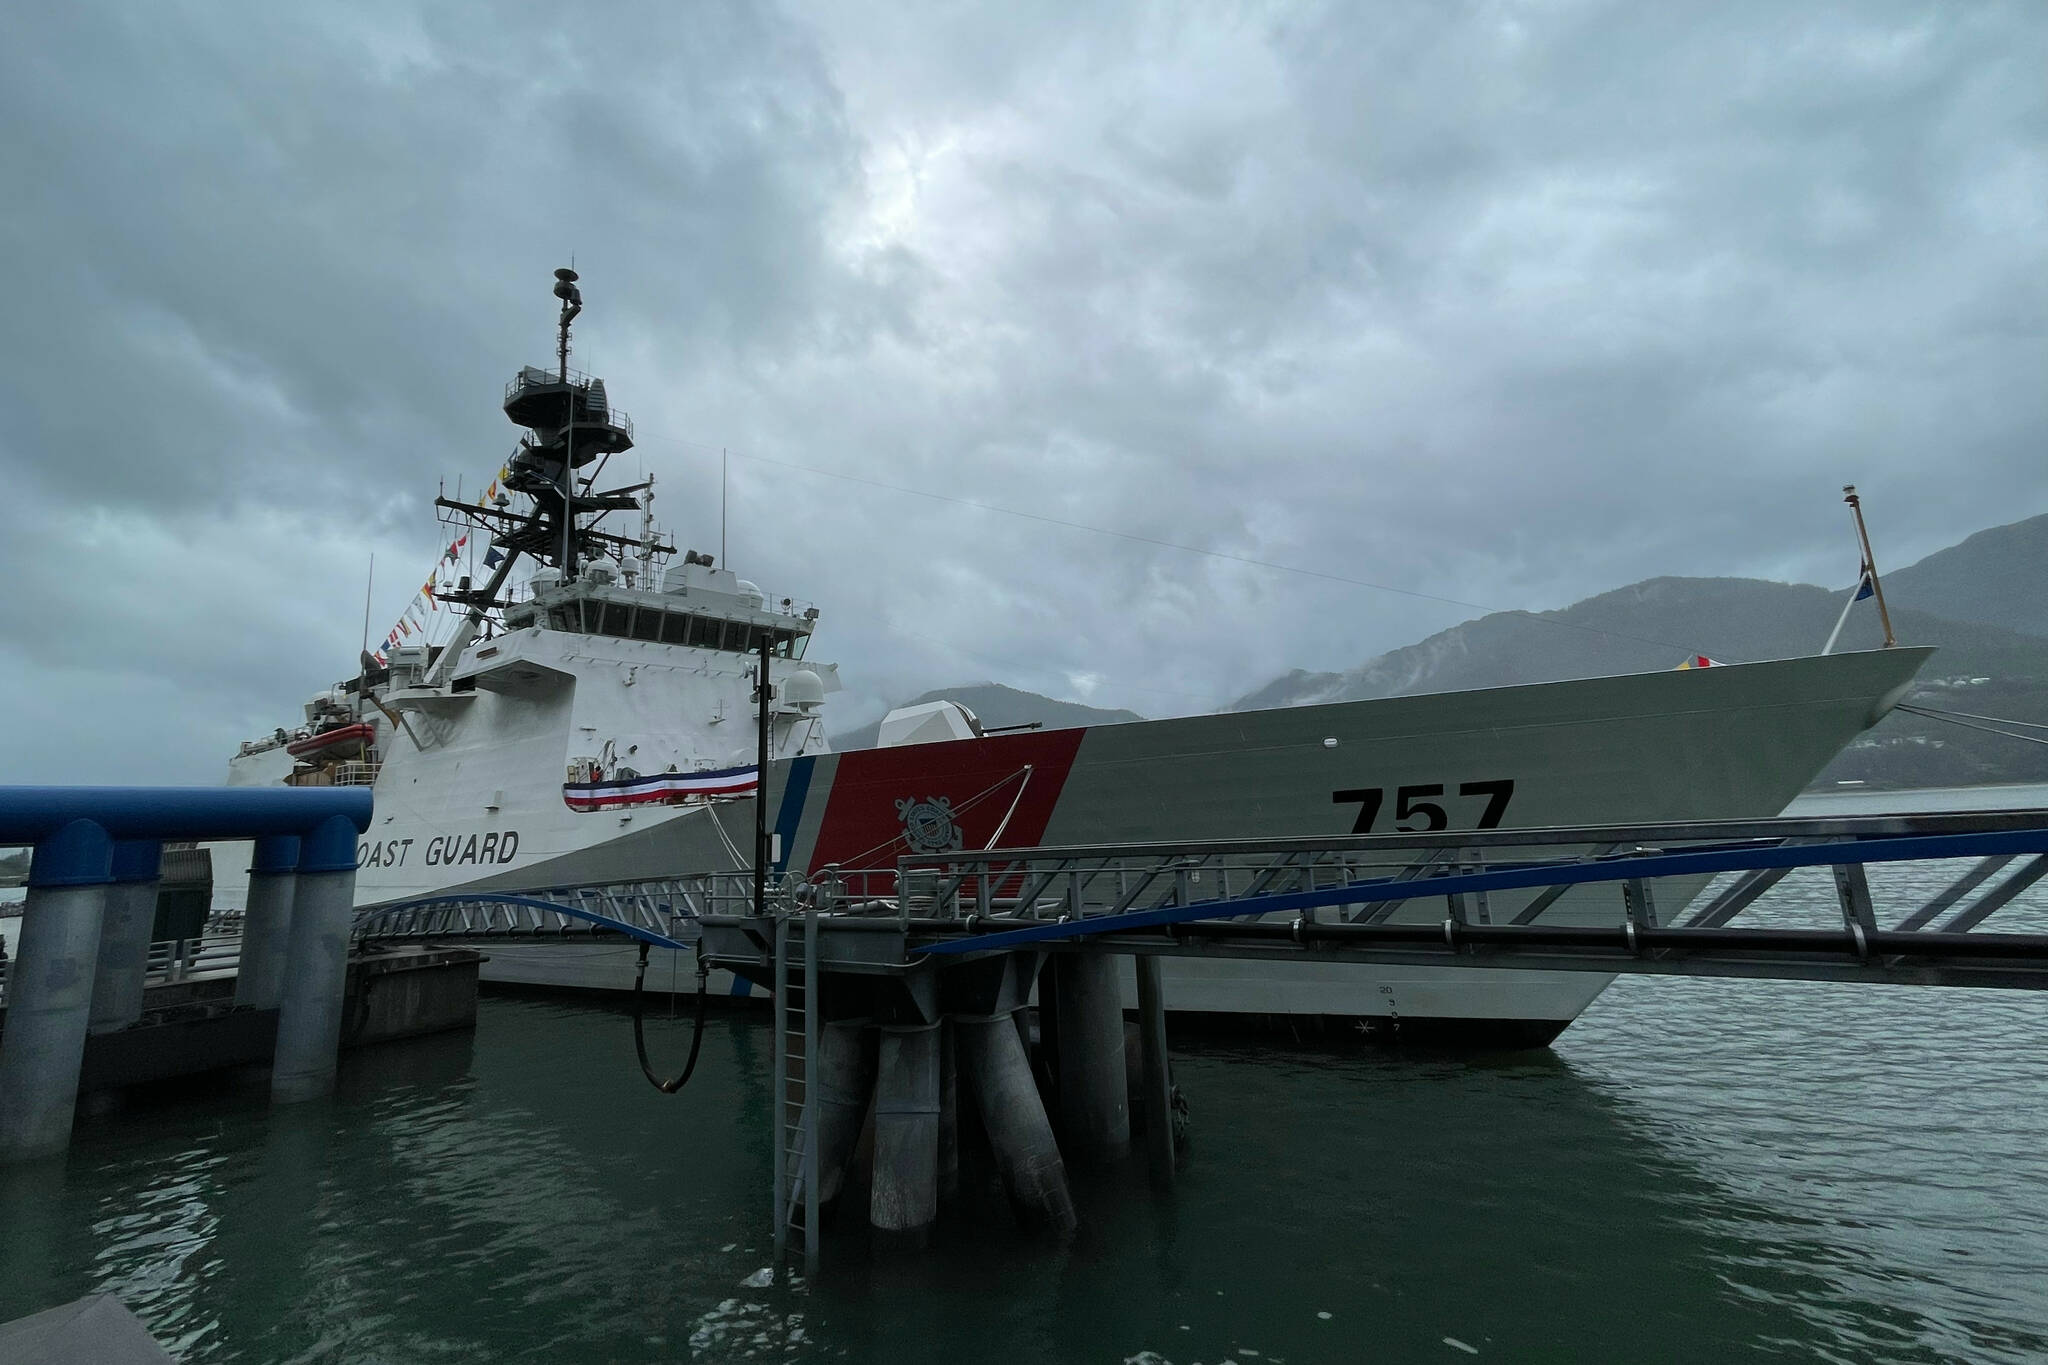 The U.S. Coast Guard is seeking to increase recruitment numbers after a pandemic-induced drop left the expanding service understrength. (Michael S. Lockett / Juneau Empire)